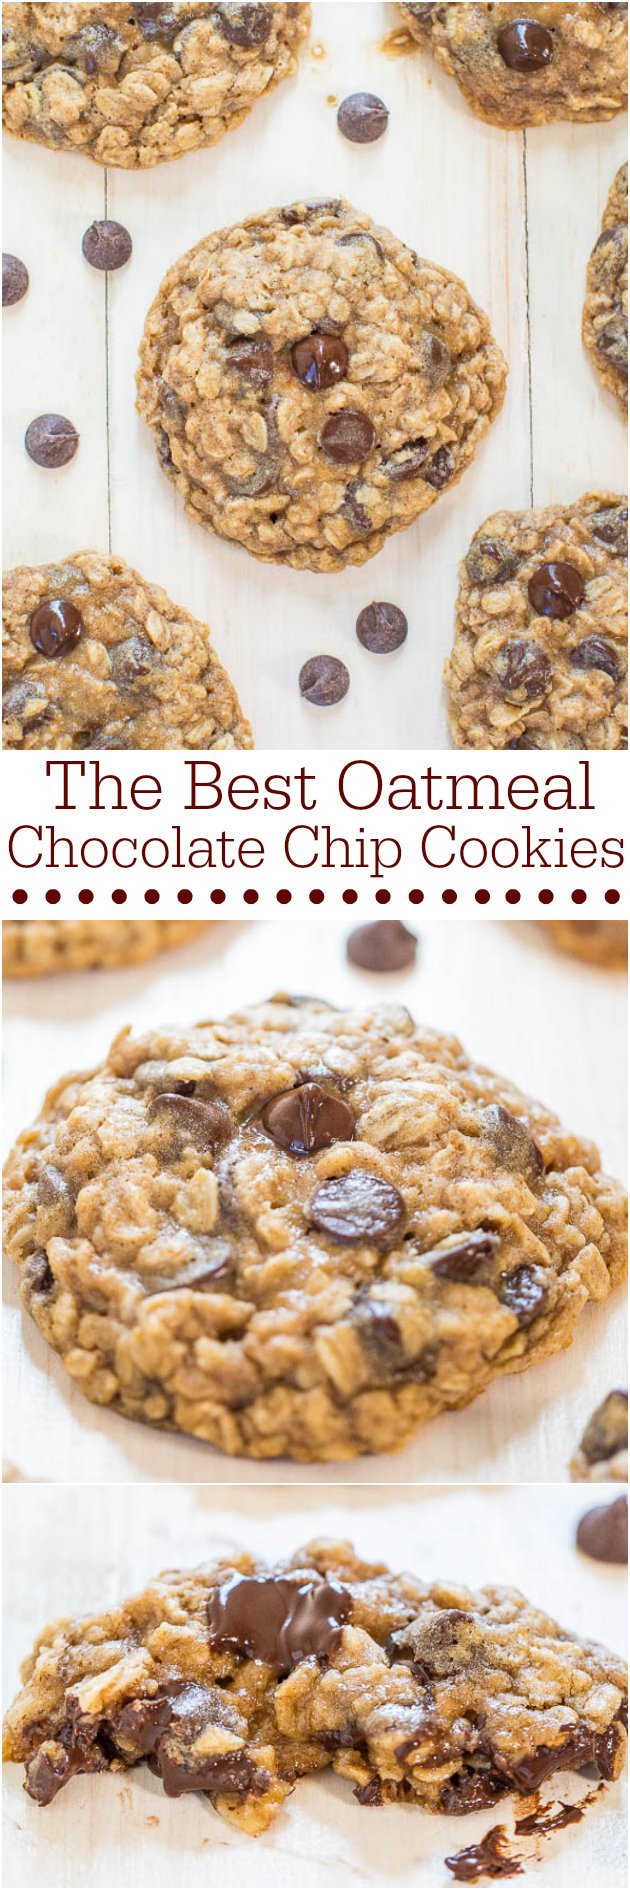 The Best Oatmeal Chocolate Chip Cookies - Soft, chewy, loaded with chocolate, and they turn out perfectly every time! Totally irresistible!!